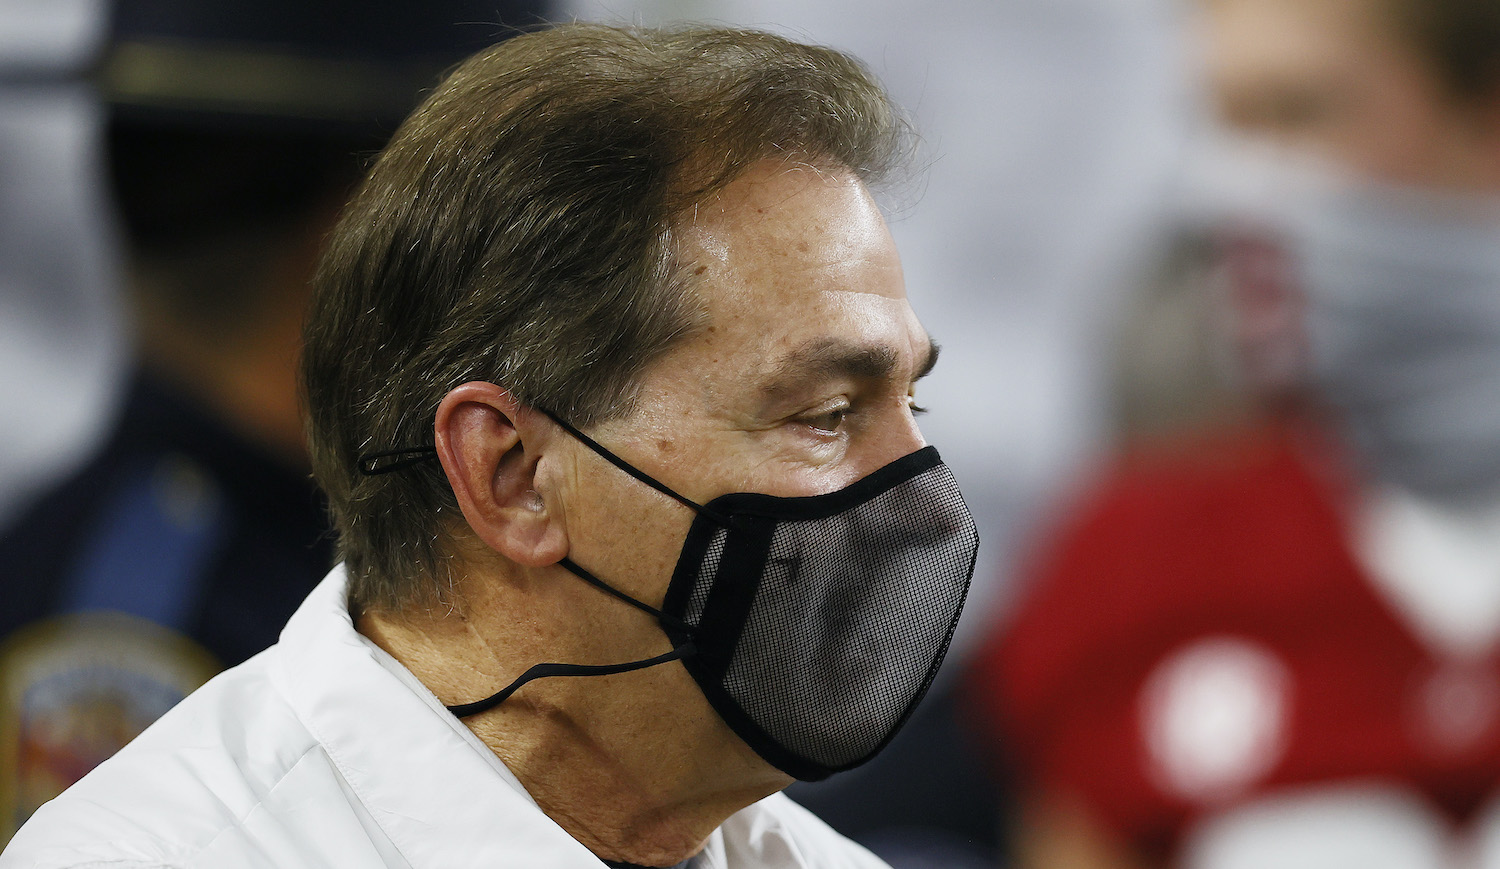 ARLINGTON, TEXAS - JANUARY 01: Head coach Nick Saban of the Alabama Crimson Tide walks on the field, masked prior to the 2021 College Football Playoff Semifinal Game at the Rose Bowl Game presented by Capital One against the Notre Dame Fighting Irish at AT&amp;T Stadium on January 01, 2021 in Arlington, Texas. (Photo by Tom Pennington/Getty Images)